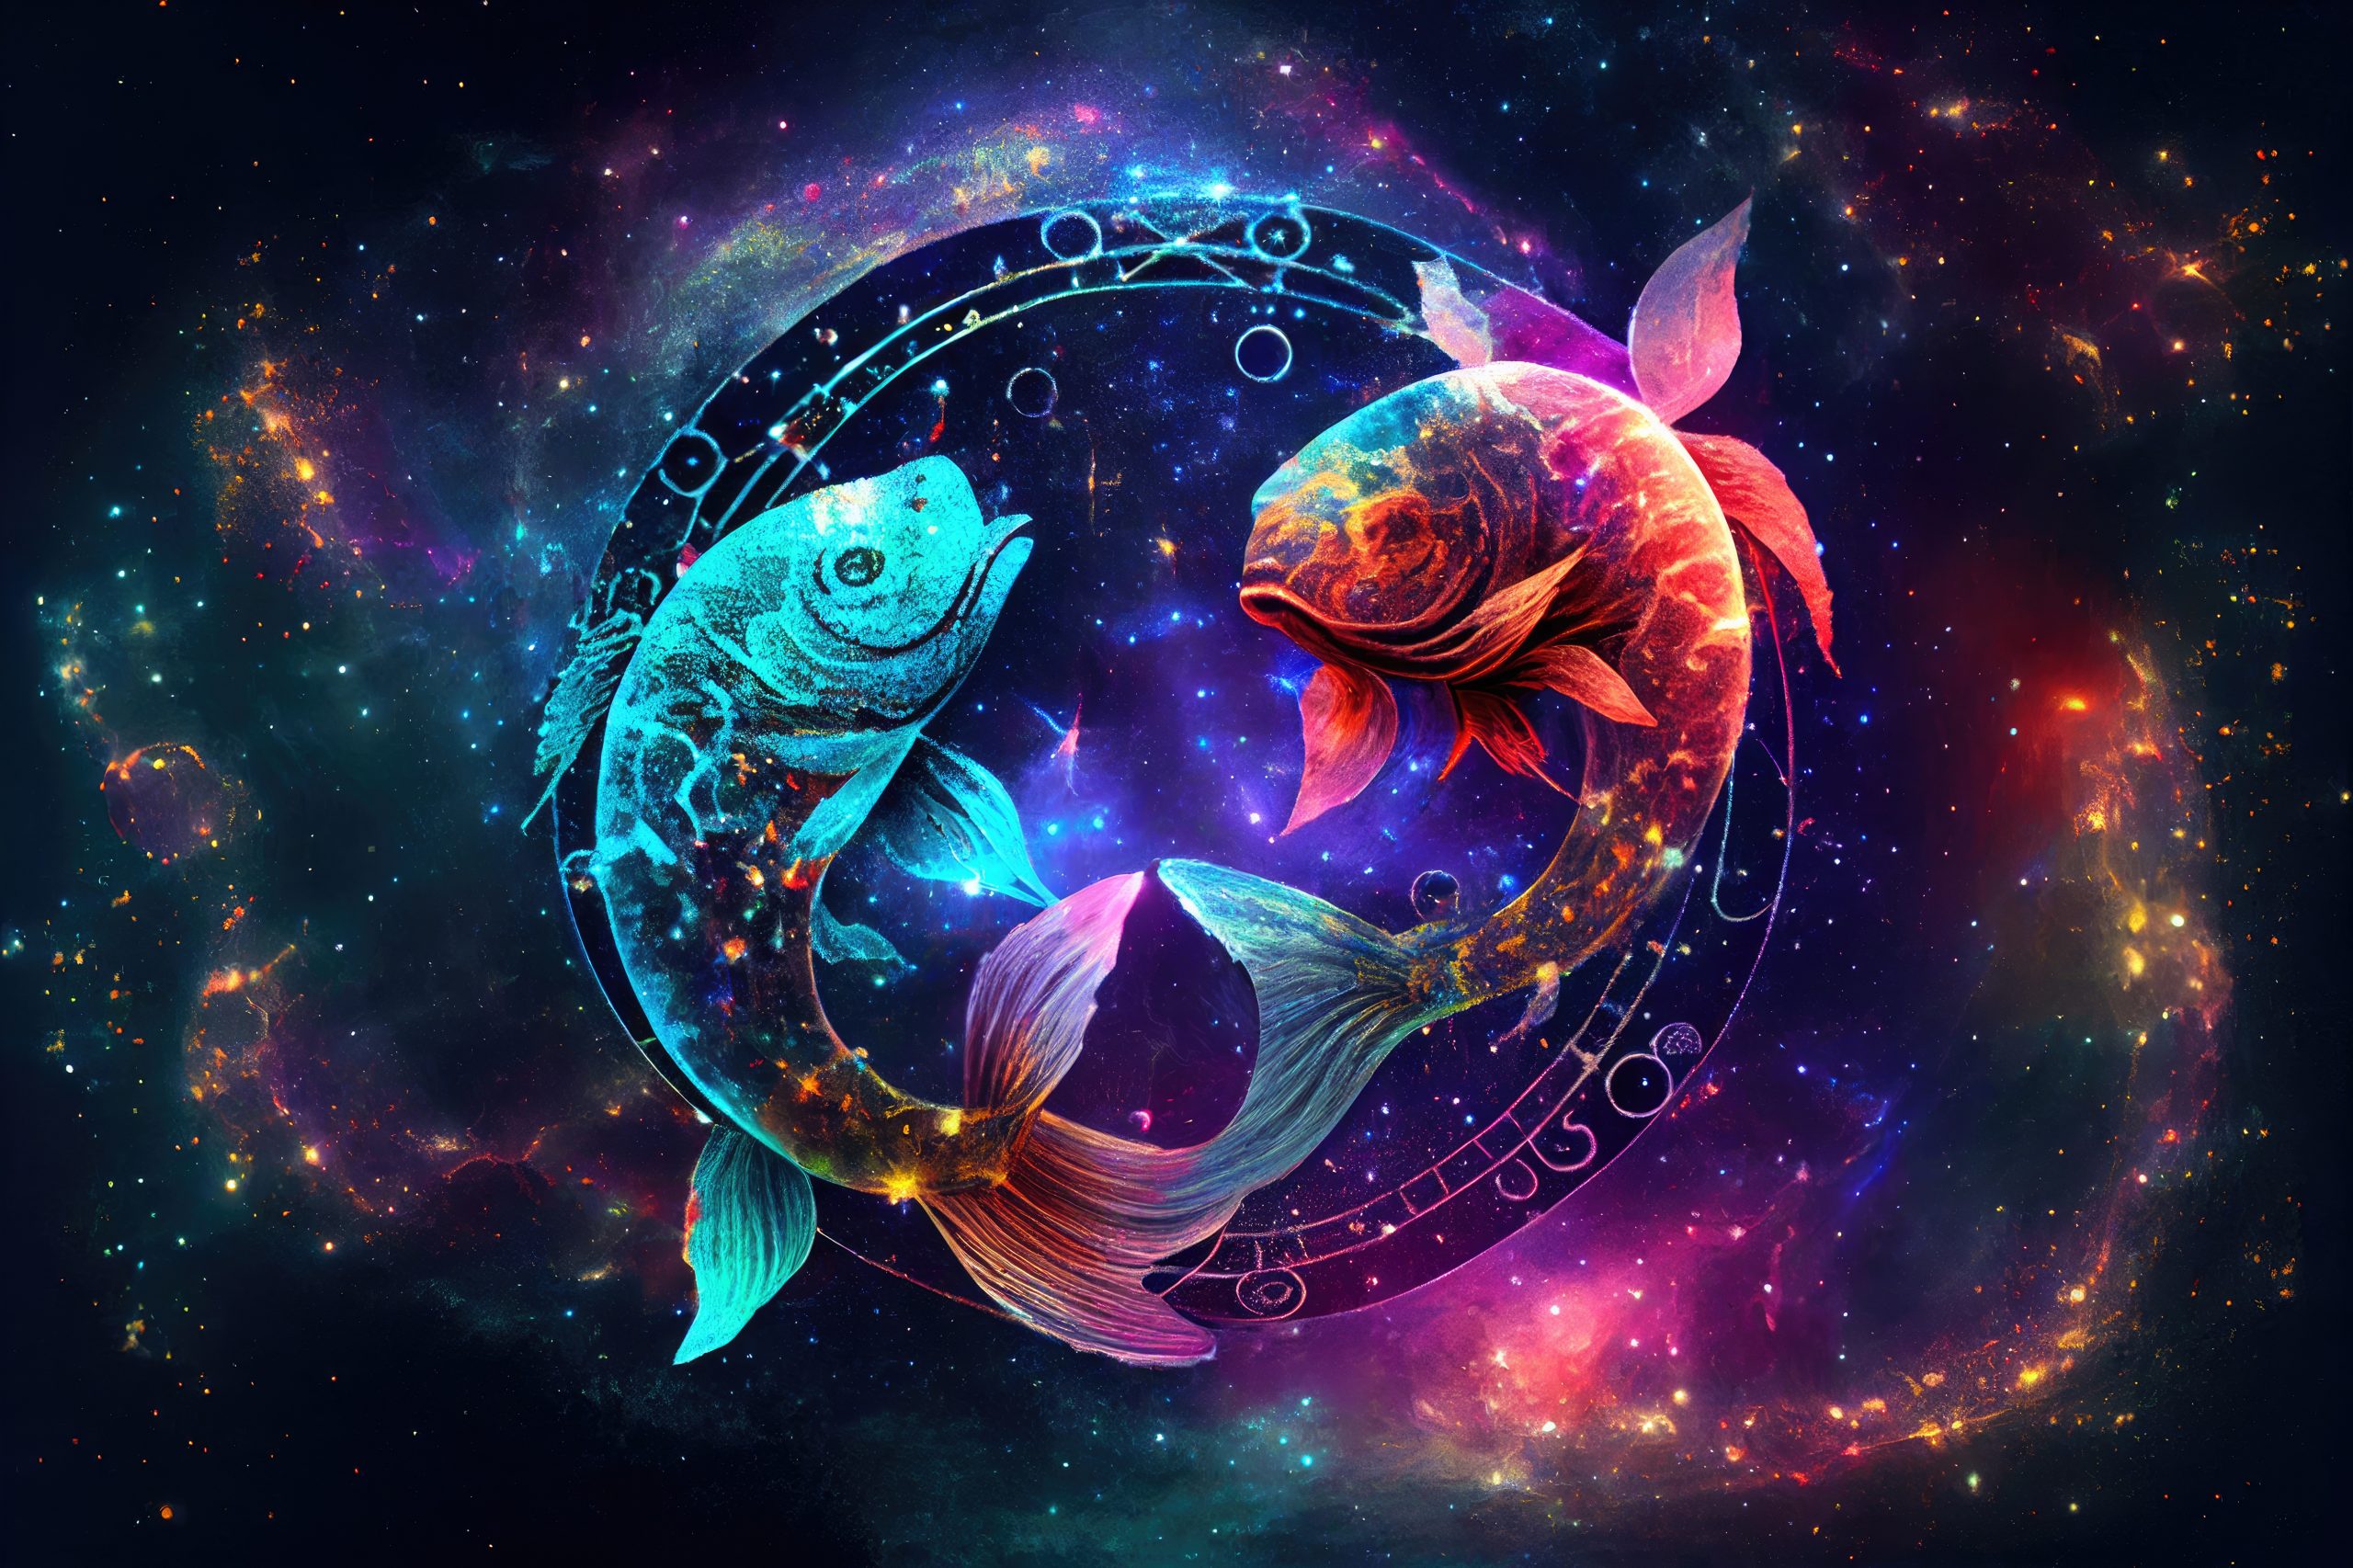 “Something Fishy About Two Adars” – The Mystical Secret of the Two Fish of Adar